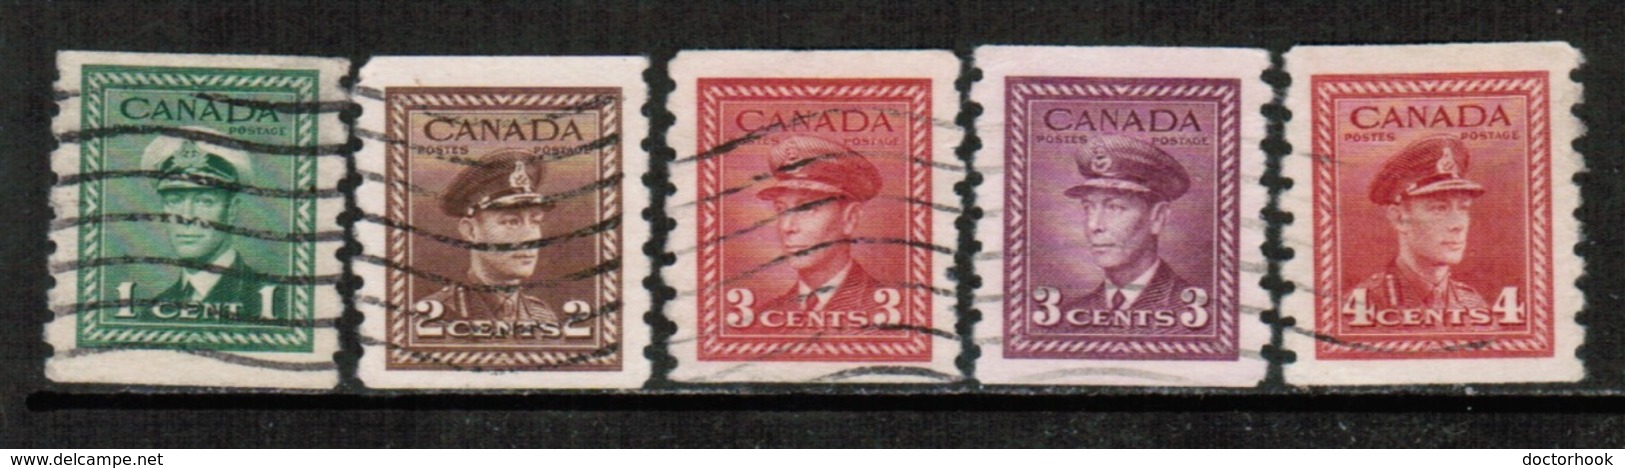 CANADA  Scott # 263-7 VF USED (Stamp Scan # 532) - Used Stamps